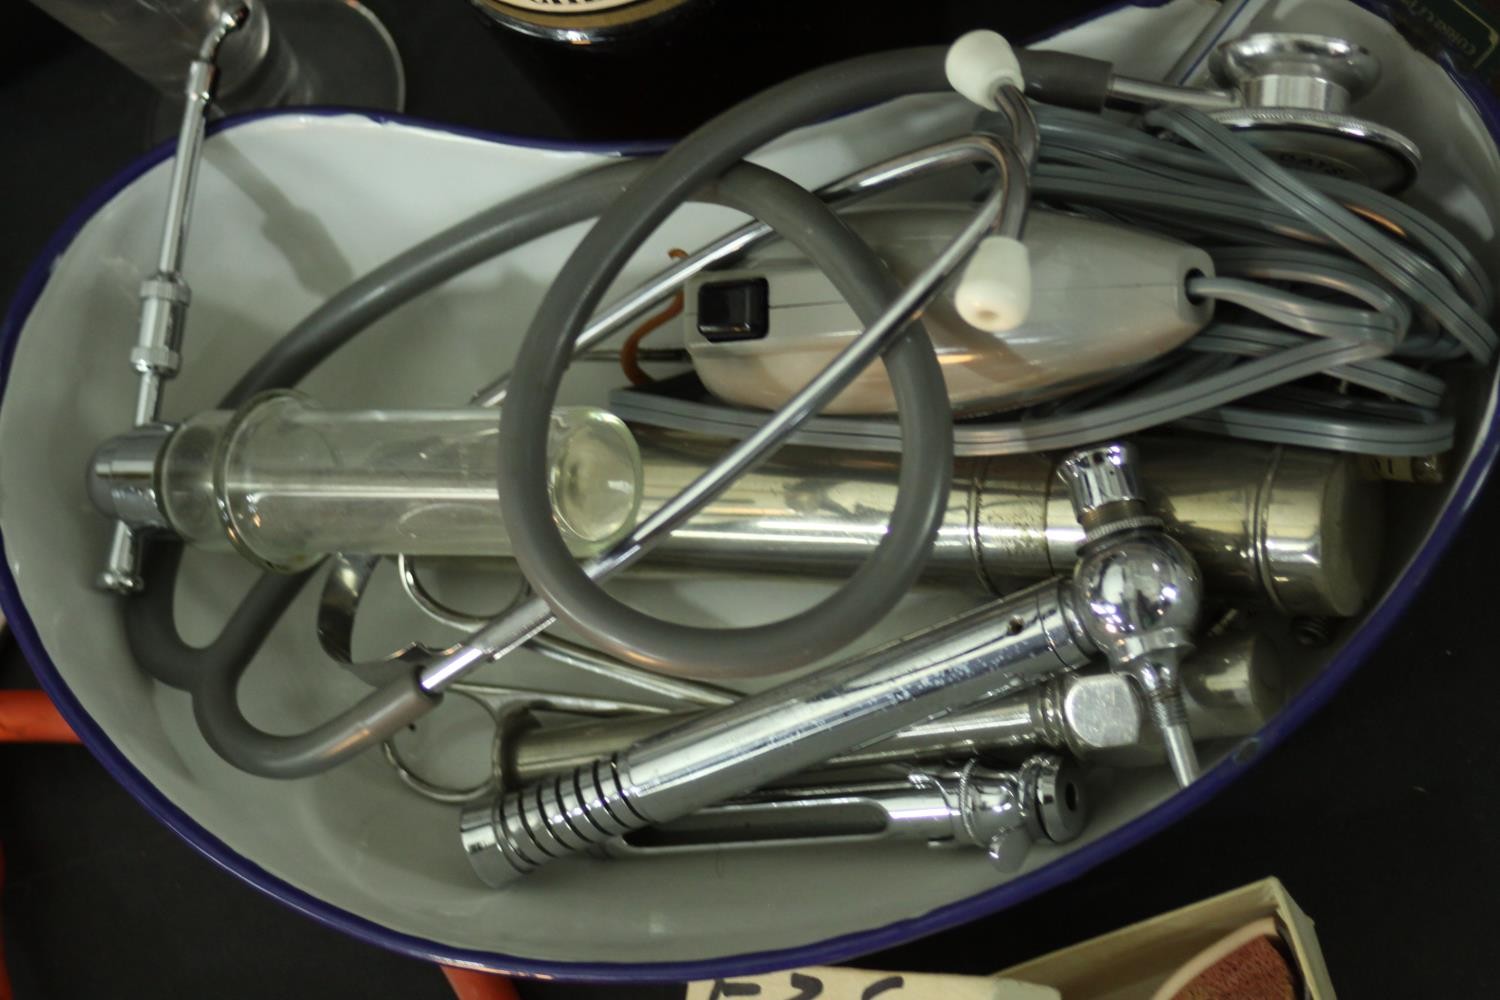 A collection of 19th and 20th century medical equipment and instruments, including syringes, a - Image 8 of 14